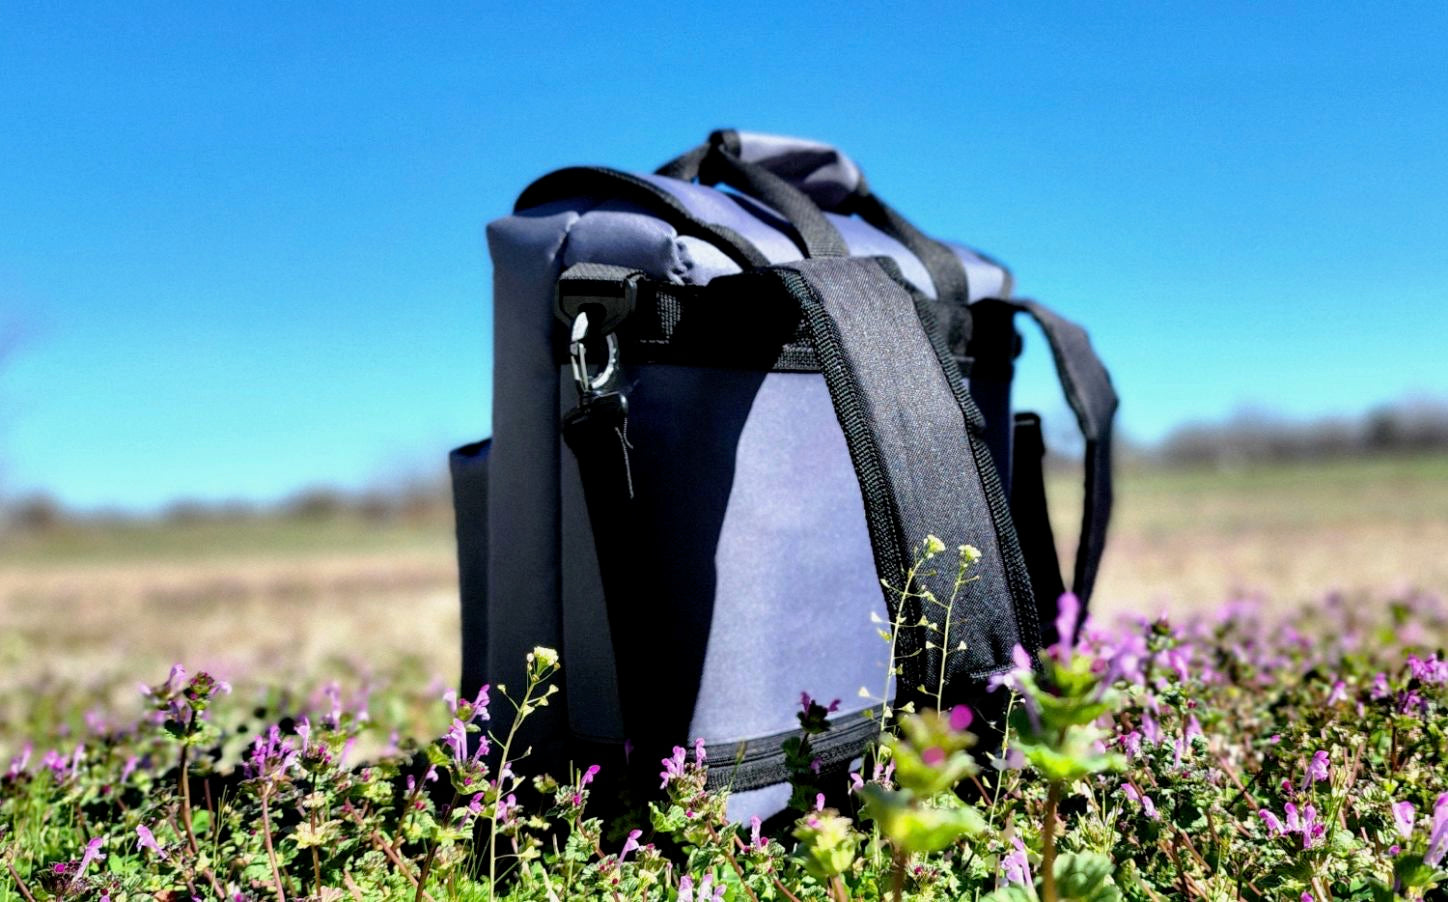 back pack cooler sitting in a field